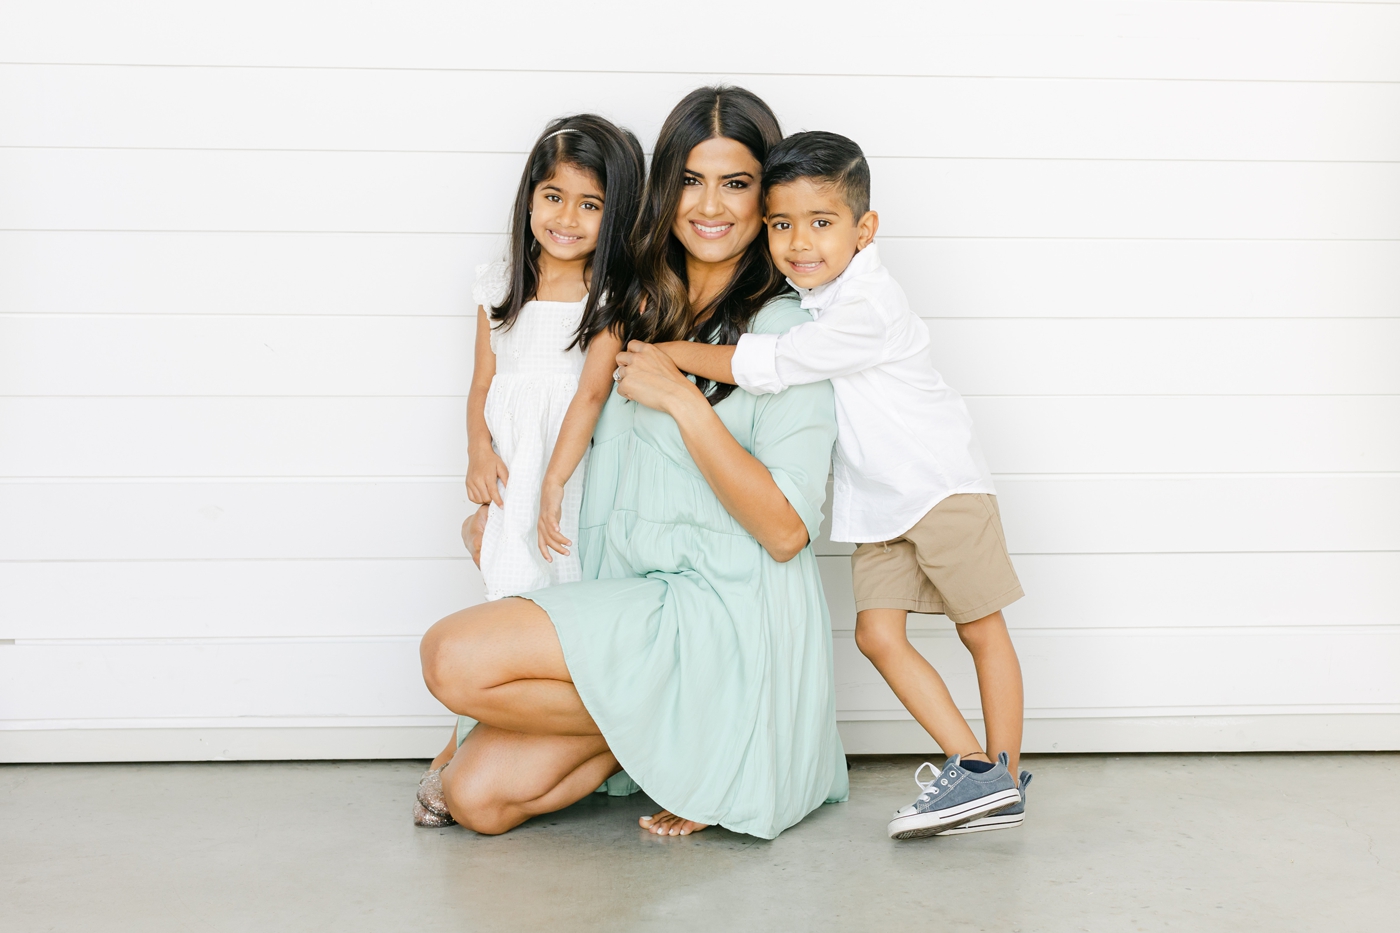 Mom kneeling with kids wrapped around her during motherhood mini session event. Photo by Sana Ahmed Photography.